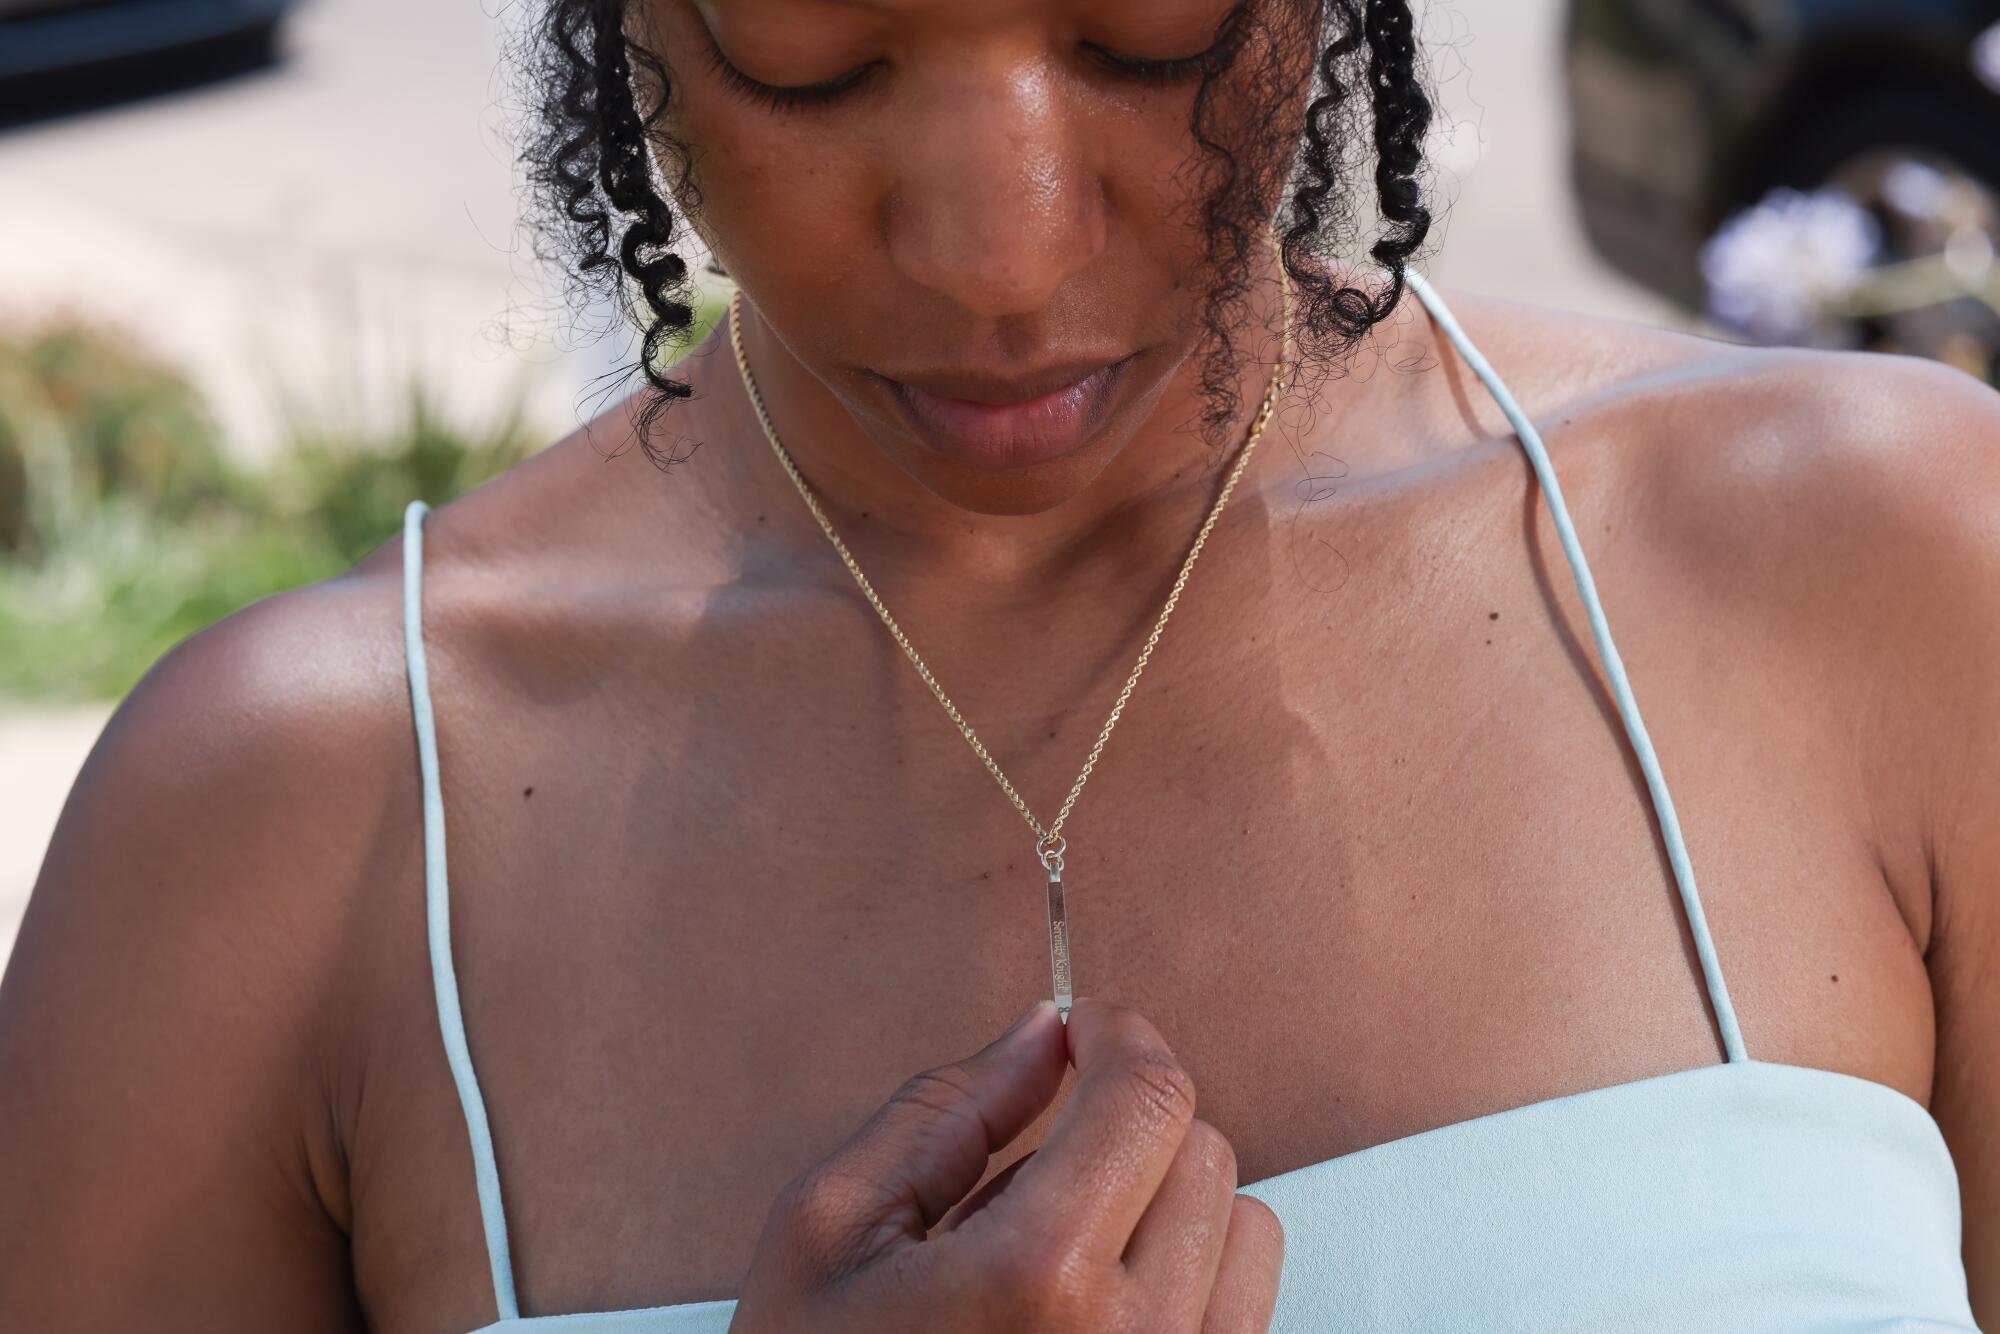 Michelle Mitchenor looks down as she touches a necklace she's wearing 